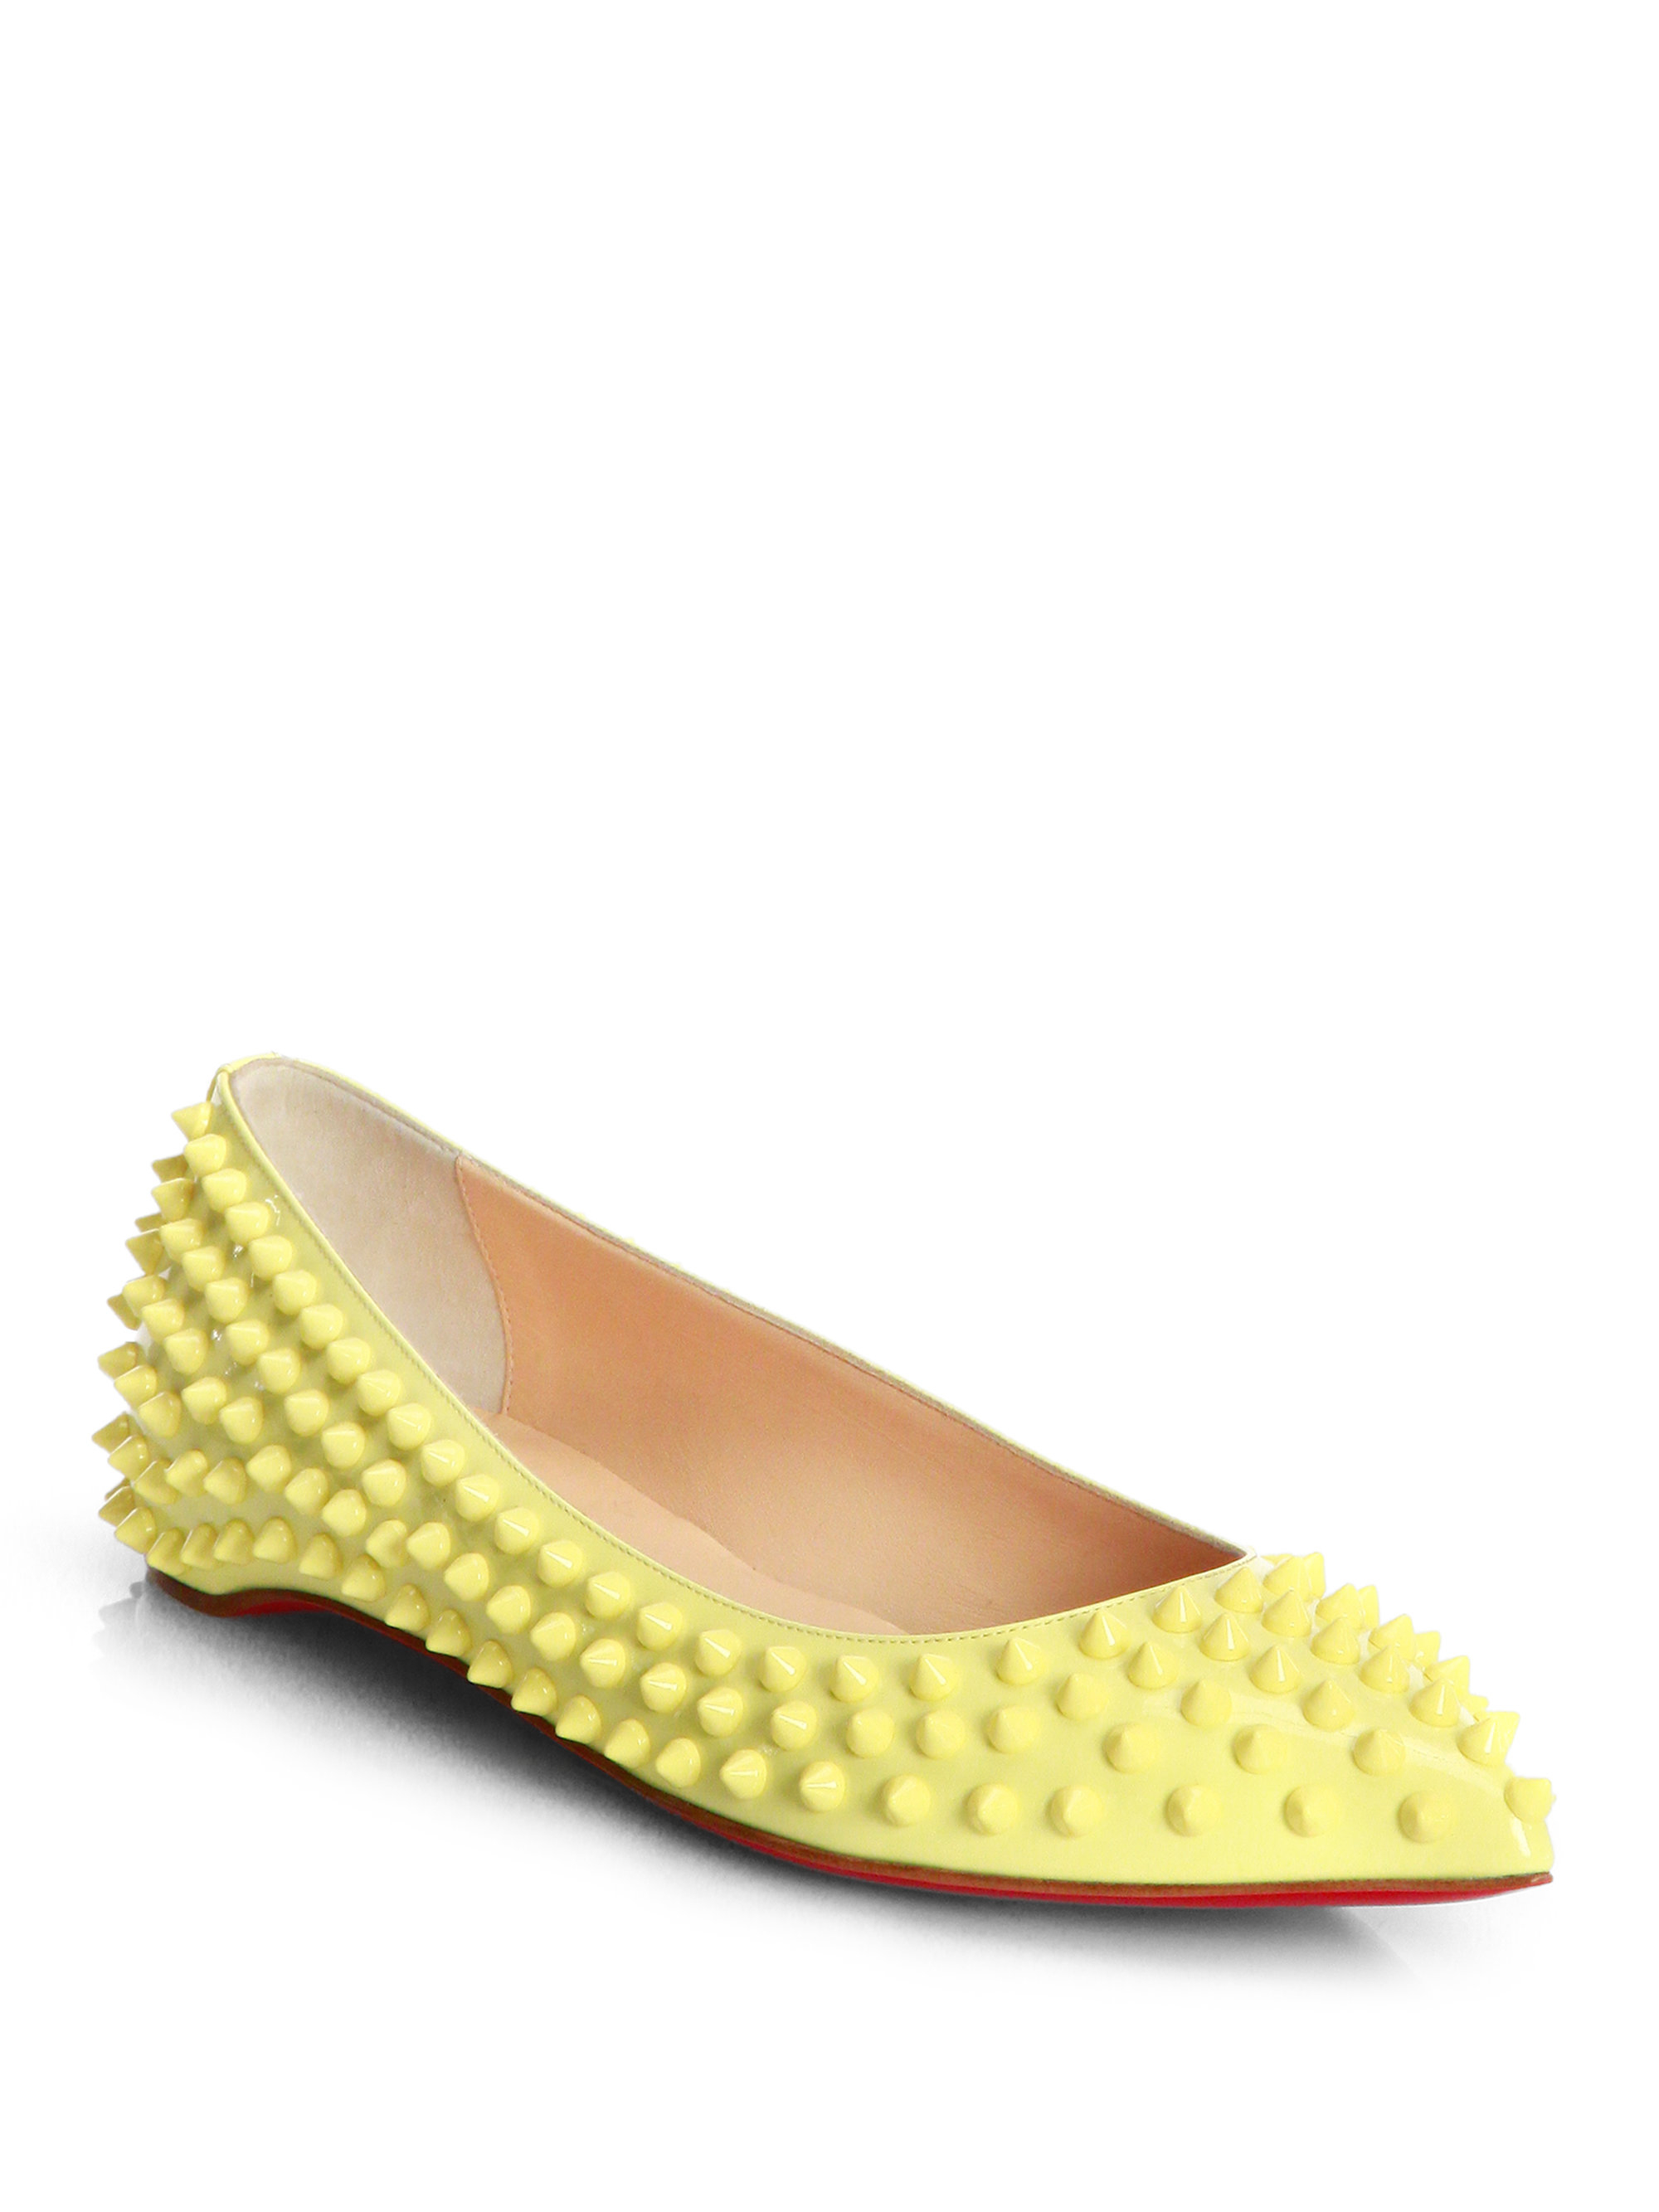 Christian louboutin Pigalle Spiked Patent Leather Flats in Yellow ...